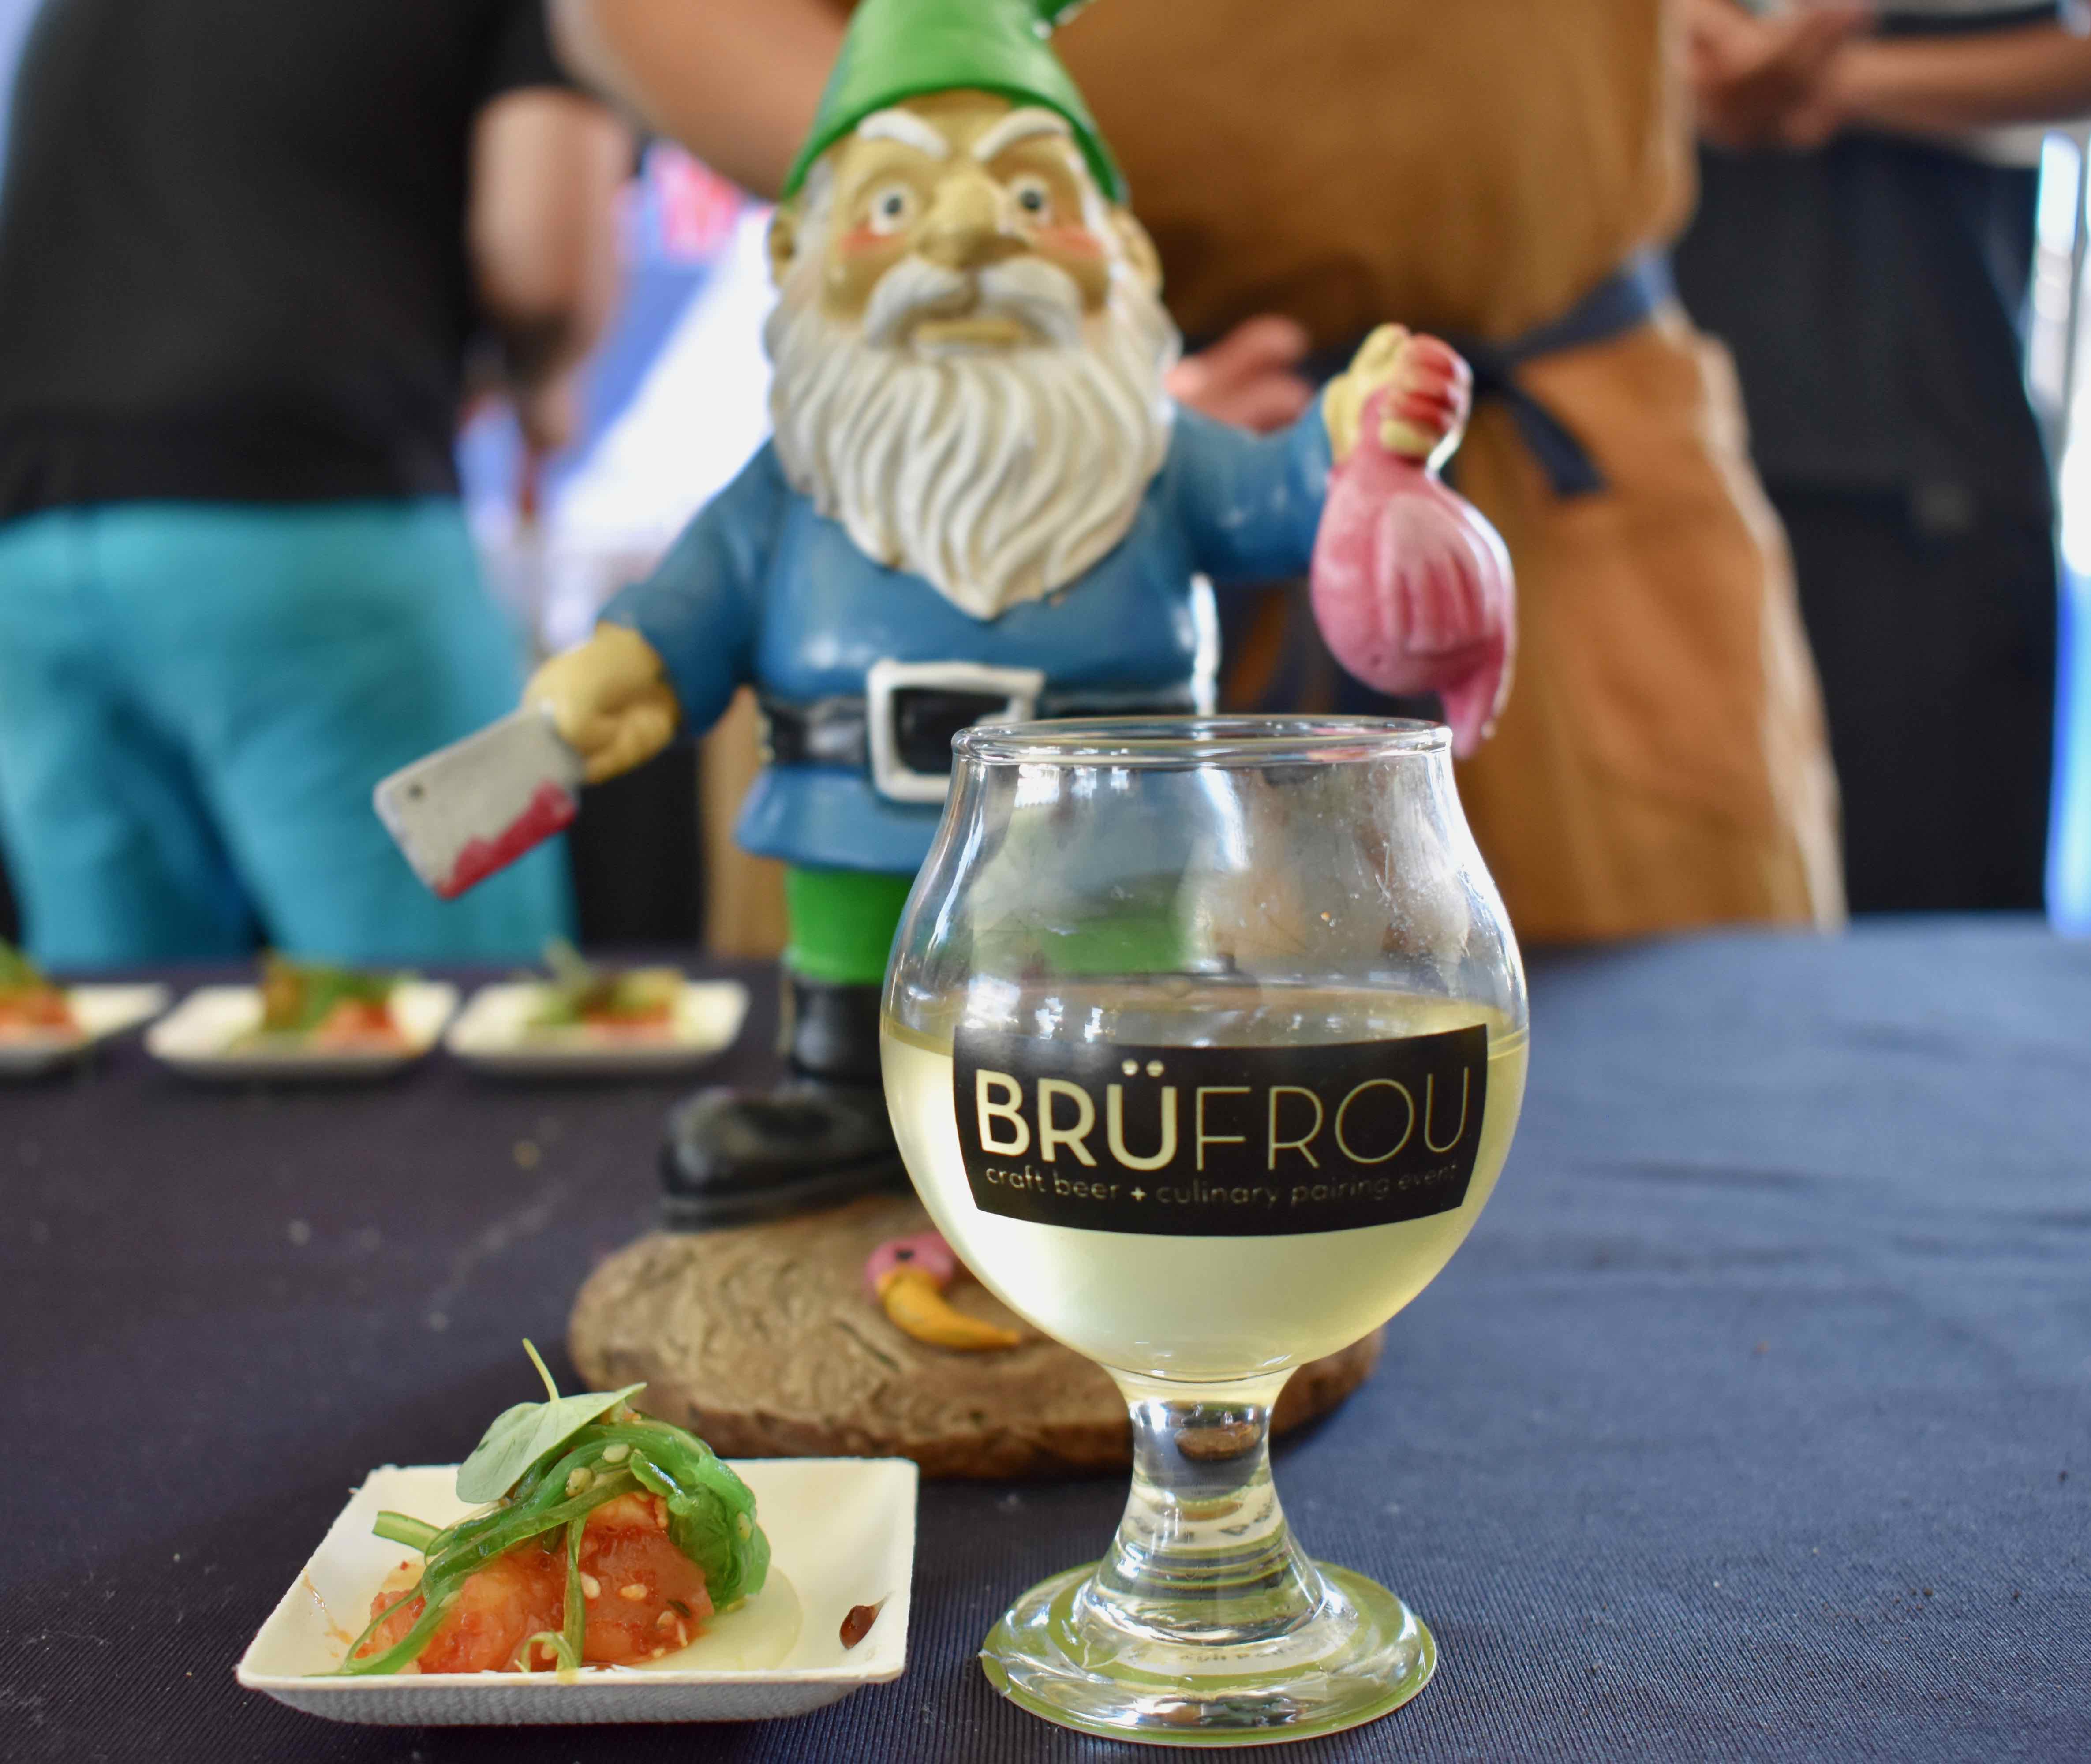 BrüFrouFest 2017, BrüFrou, Alysia Shoemaker, 303 Magazine, Craft Beer, Craft Beer and food, Craft Beer and Culinary pairings, Tivoli Quad, Photography by Alysia Shoemaker, Verboten Brewing, Blackbelly, Westbound & Down Brewing, The Buffalo, Euclid Hall, Grimm Brothers Brewhouse, Freshcraft, Horse & Dragon Brewing, Maria Empanada, Asher Brewing, Rebel, Mockery Brewing, Williams & Graham, Black Project Spontaneous & Wild Ales, Campus Lounge, Tivoli Brewing, 4 Noses Brewing, Fish N Beer, Holidaily Brewing, Fresh Thymes Eatery, Glazed & Confused, Fiction Beer Company, Mainline Ale House, High Hops Brewery, Second Home Kitchen + Bar, Banded Oak Brewing, Samples World Bistro, Wibby Brewing